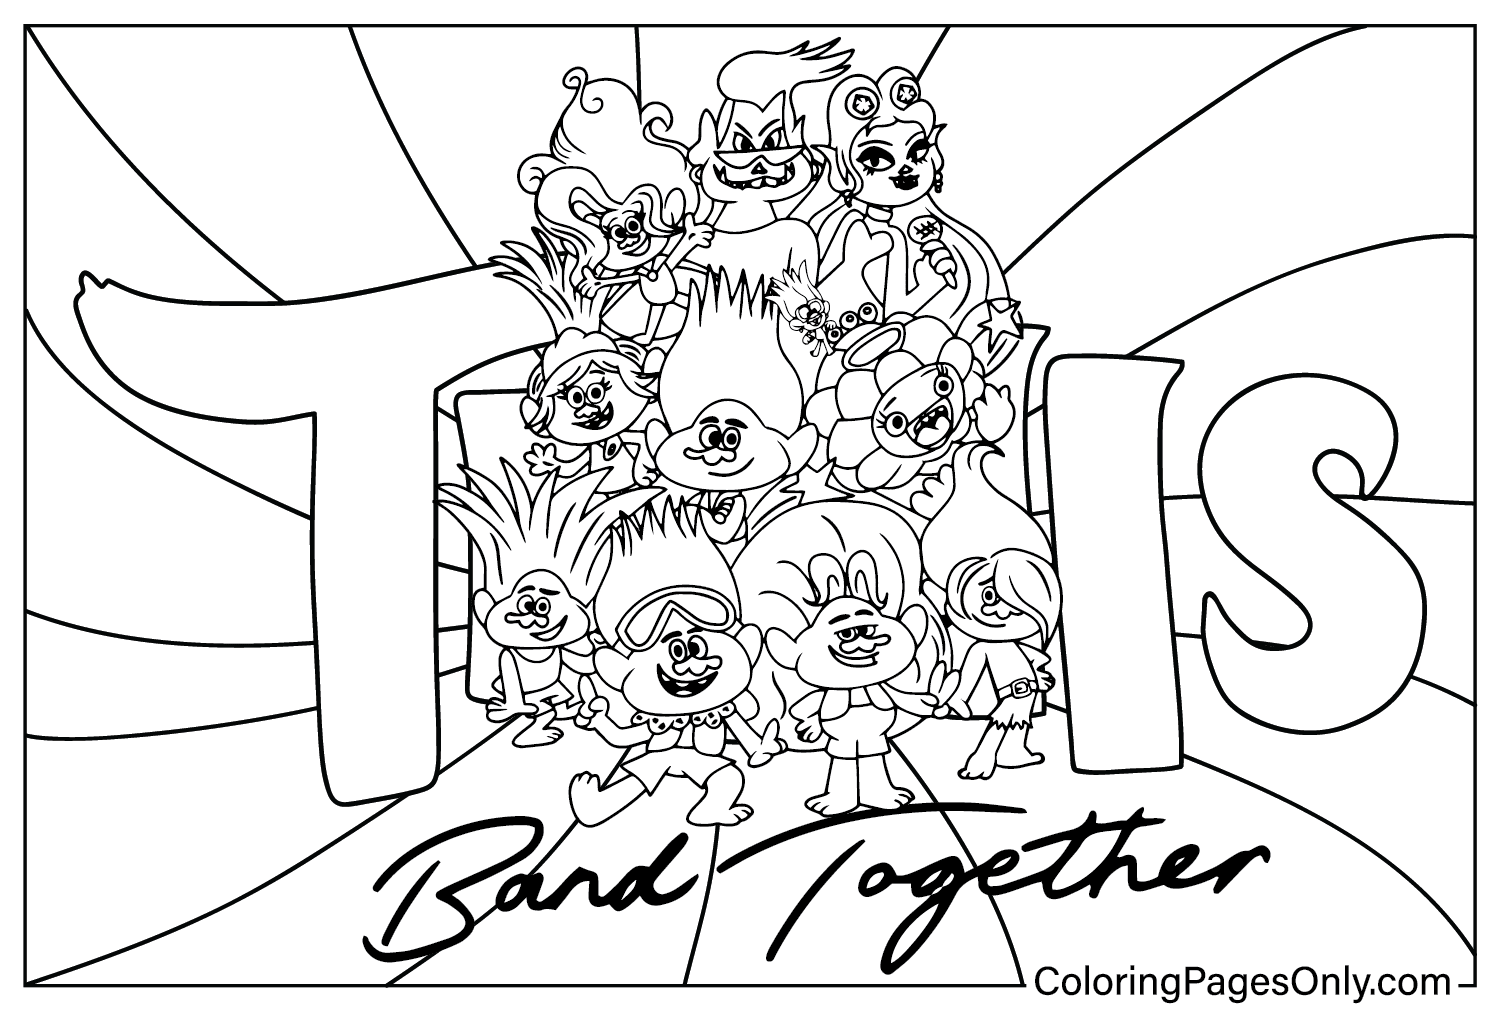 Trolls Band Together Coloring Sheet for Kids - Free Printable Coloring Pages